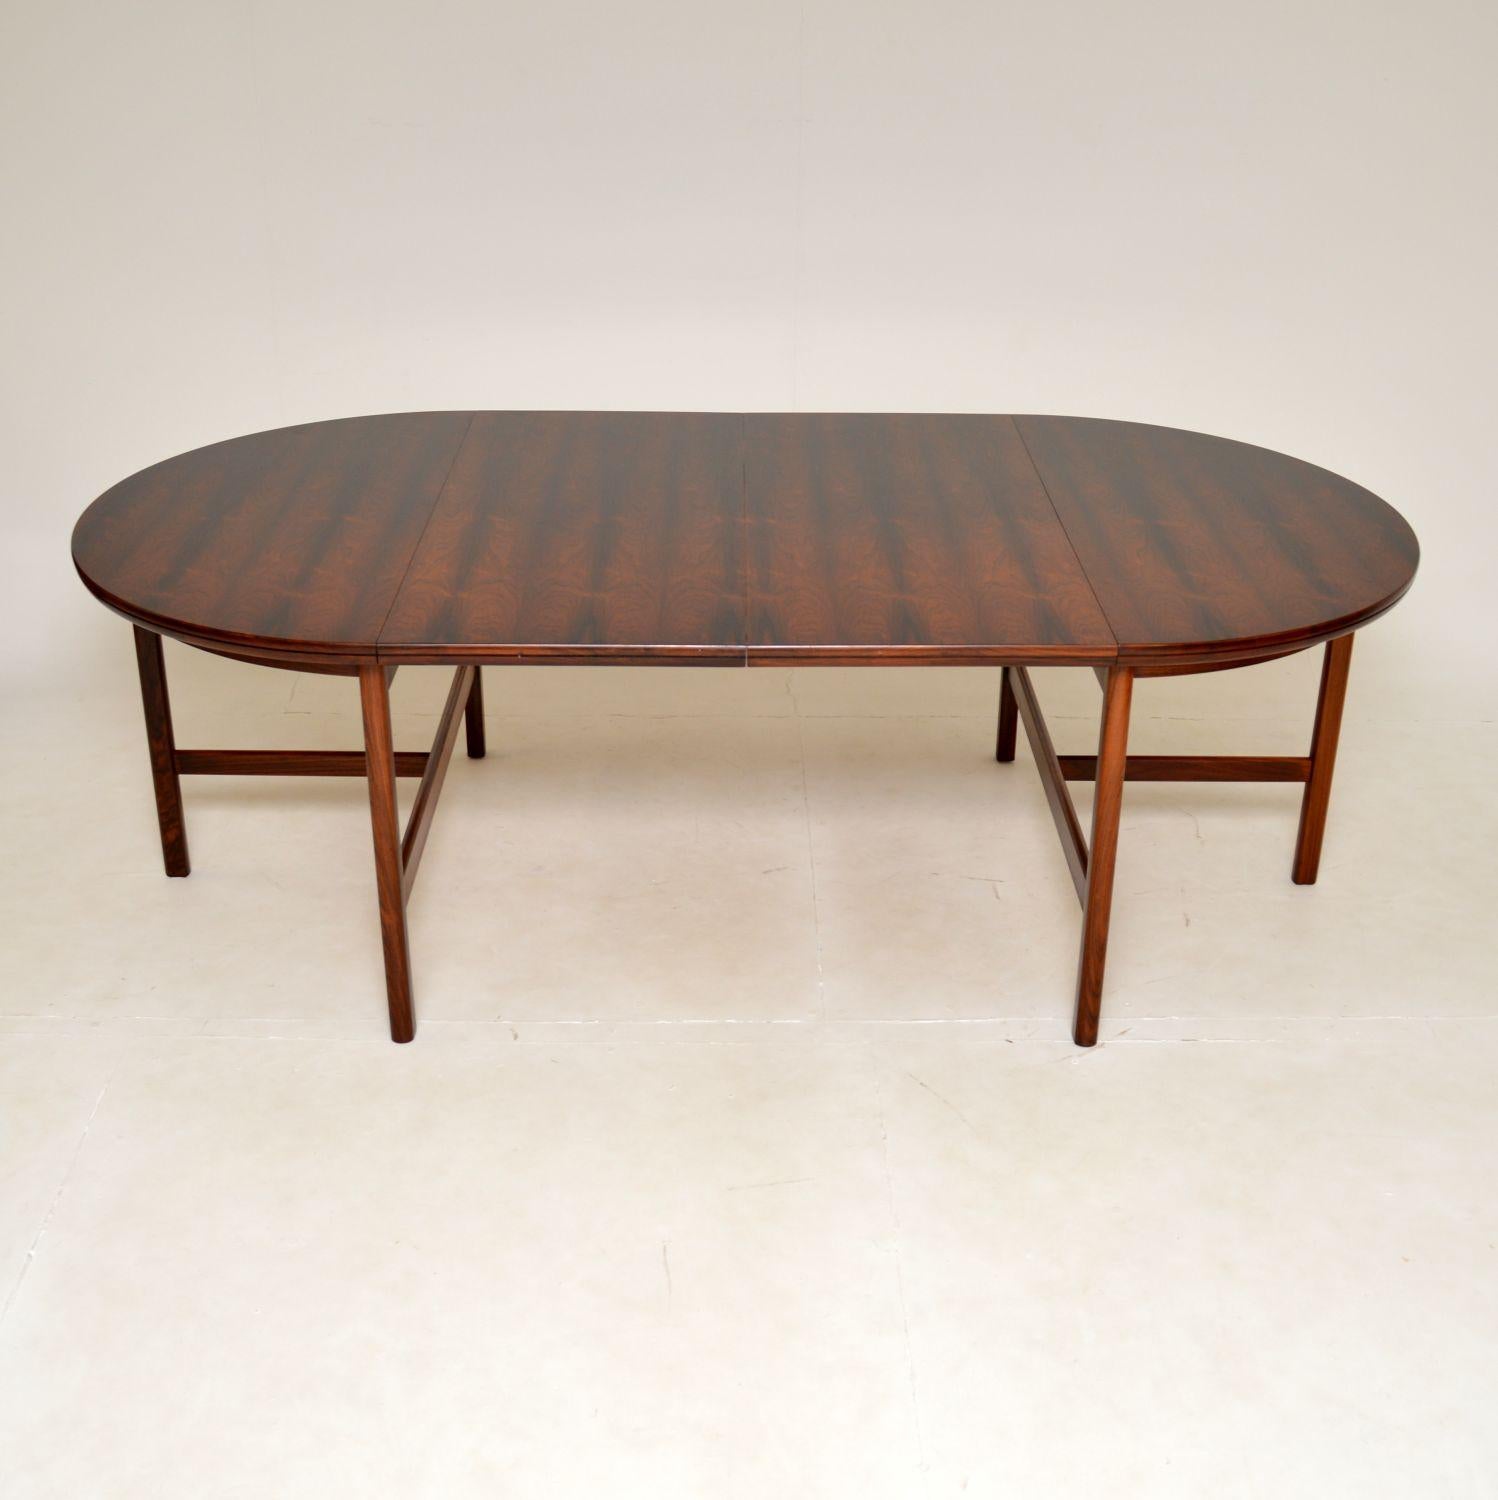 A magnificent vintage extending dining table. This was designed by Robert Heritage for Archie Shine, it was made in England in the 1960s.

This is of lovely proportions, when closed it seats four, and there are two additional leaves that come with